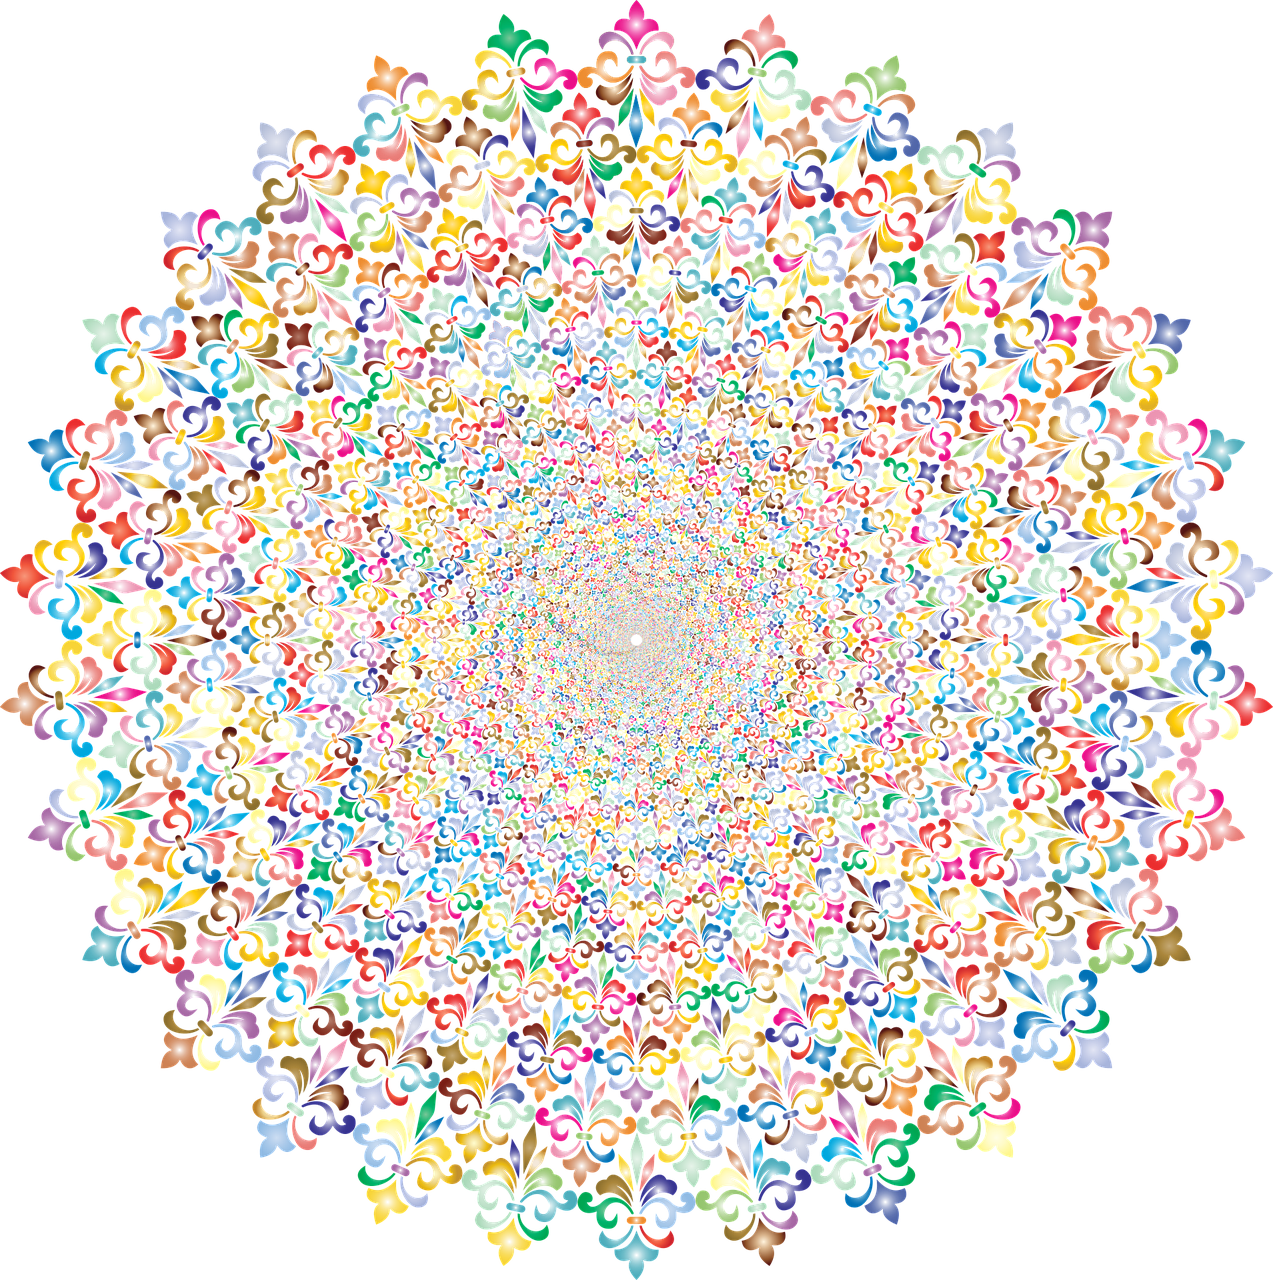 multicolored stars arranged in a circle on a black background, a pointillism painting, inspired by Benoit B. Mandelbrot, raqib shaw, layered paper art, detailed pixel artwork, jester